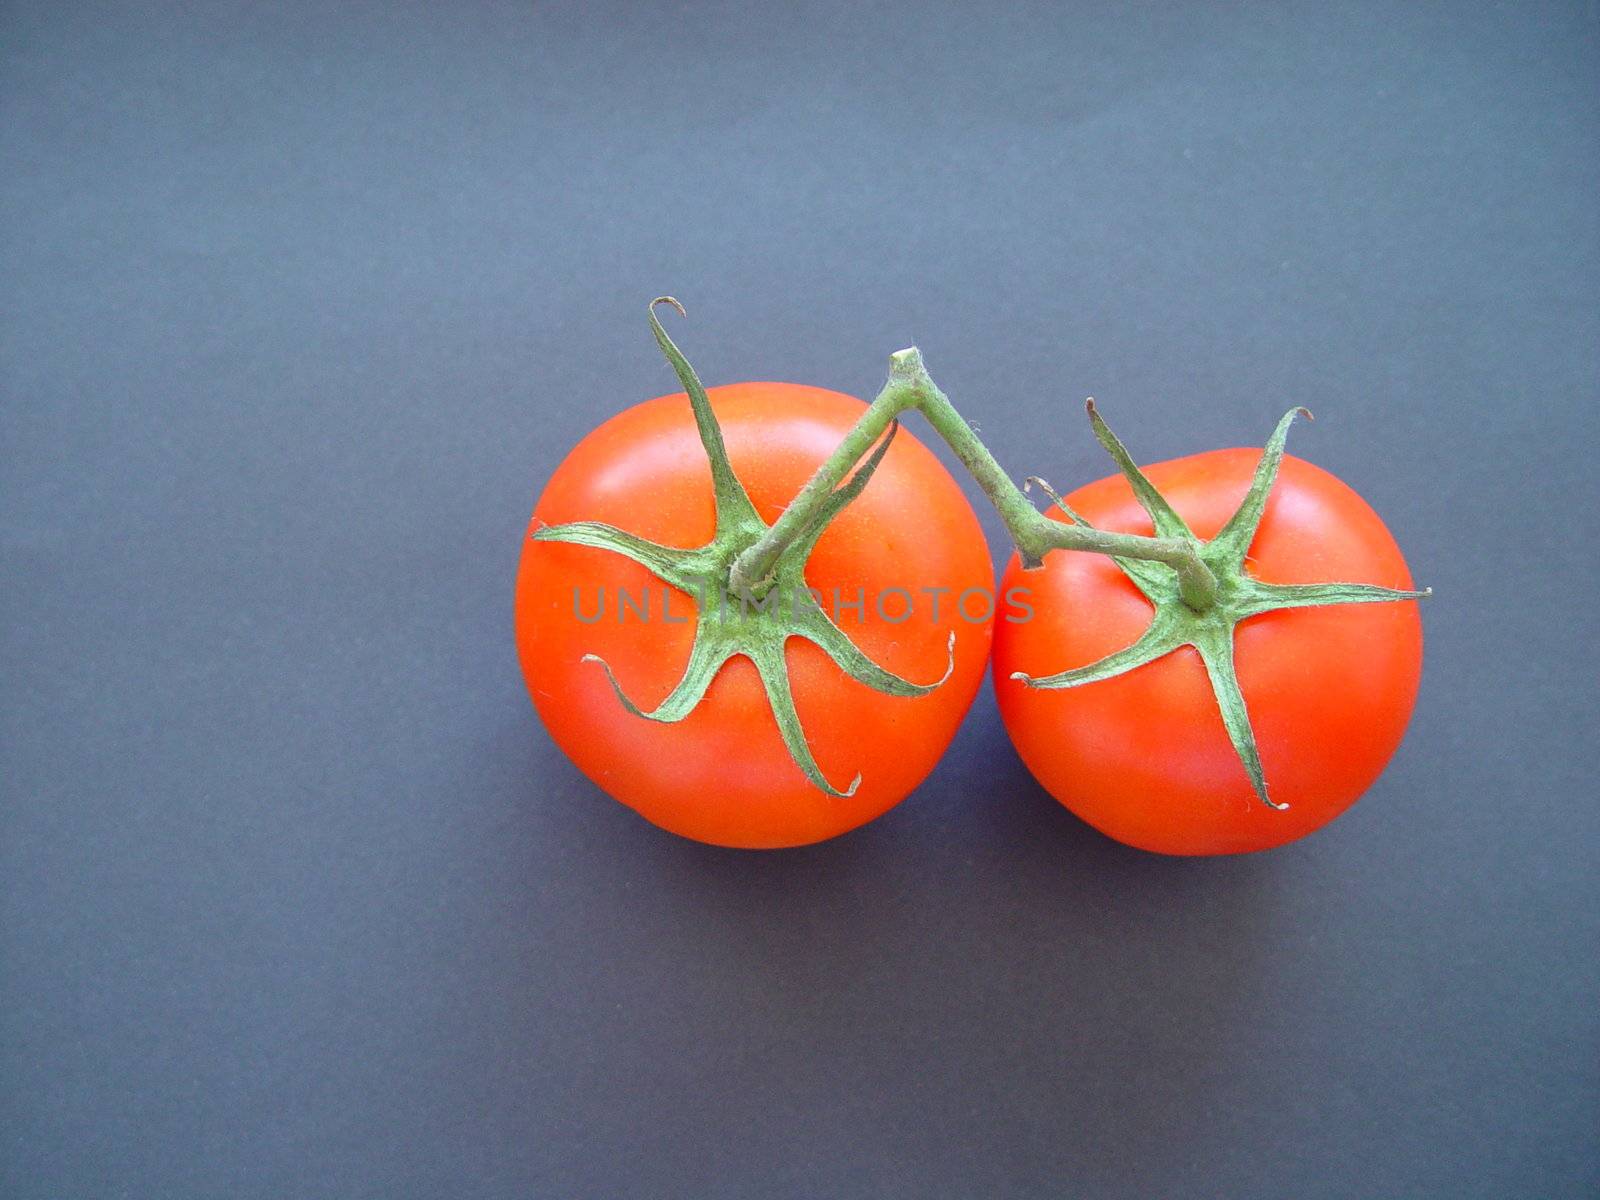 Two bright red tomatoes on black background.